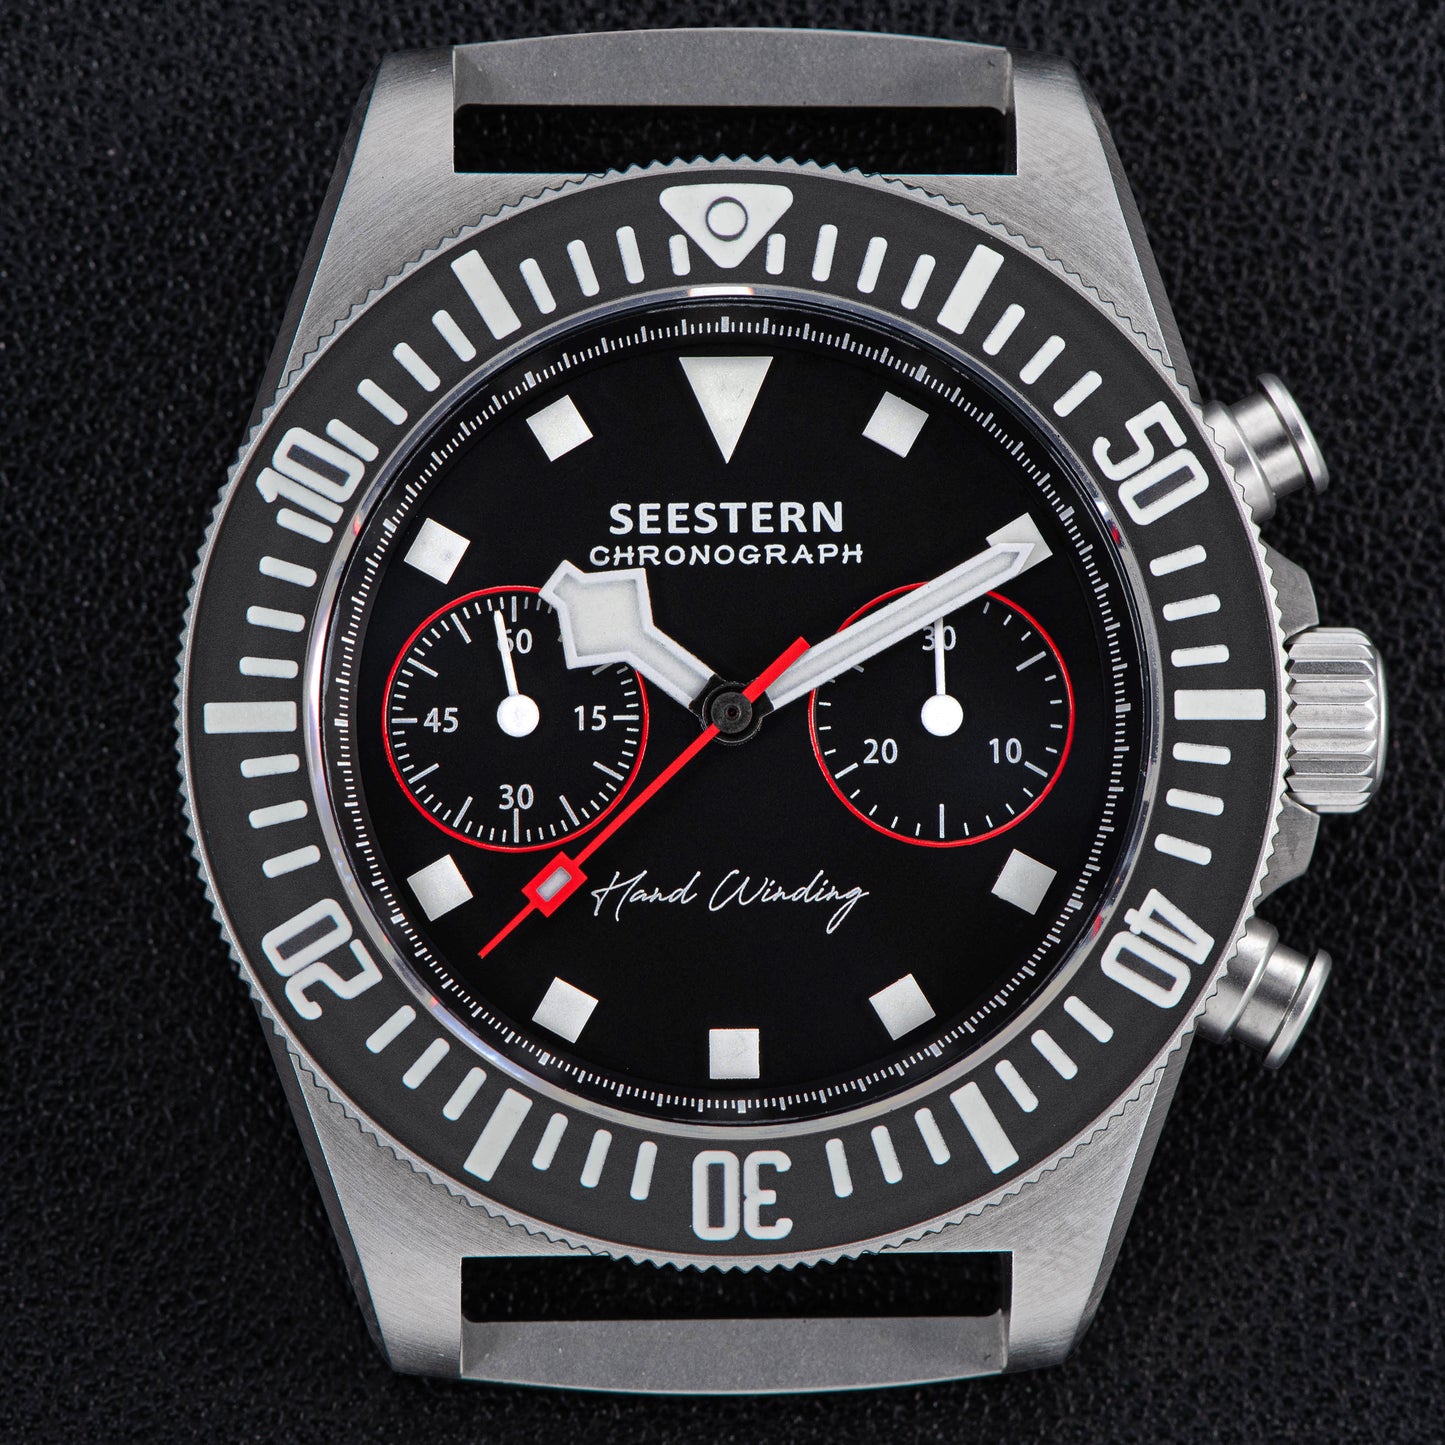 Seestern Chronograph Limited S445.K